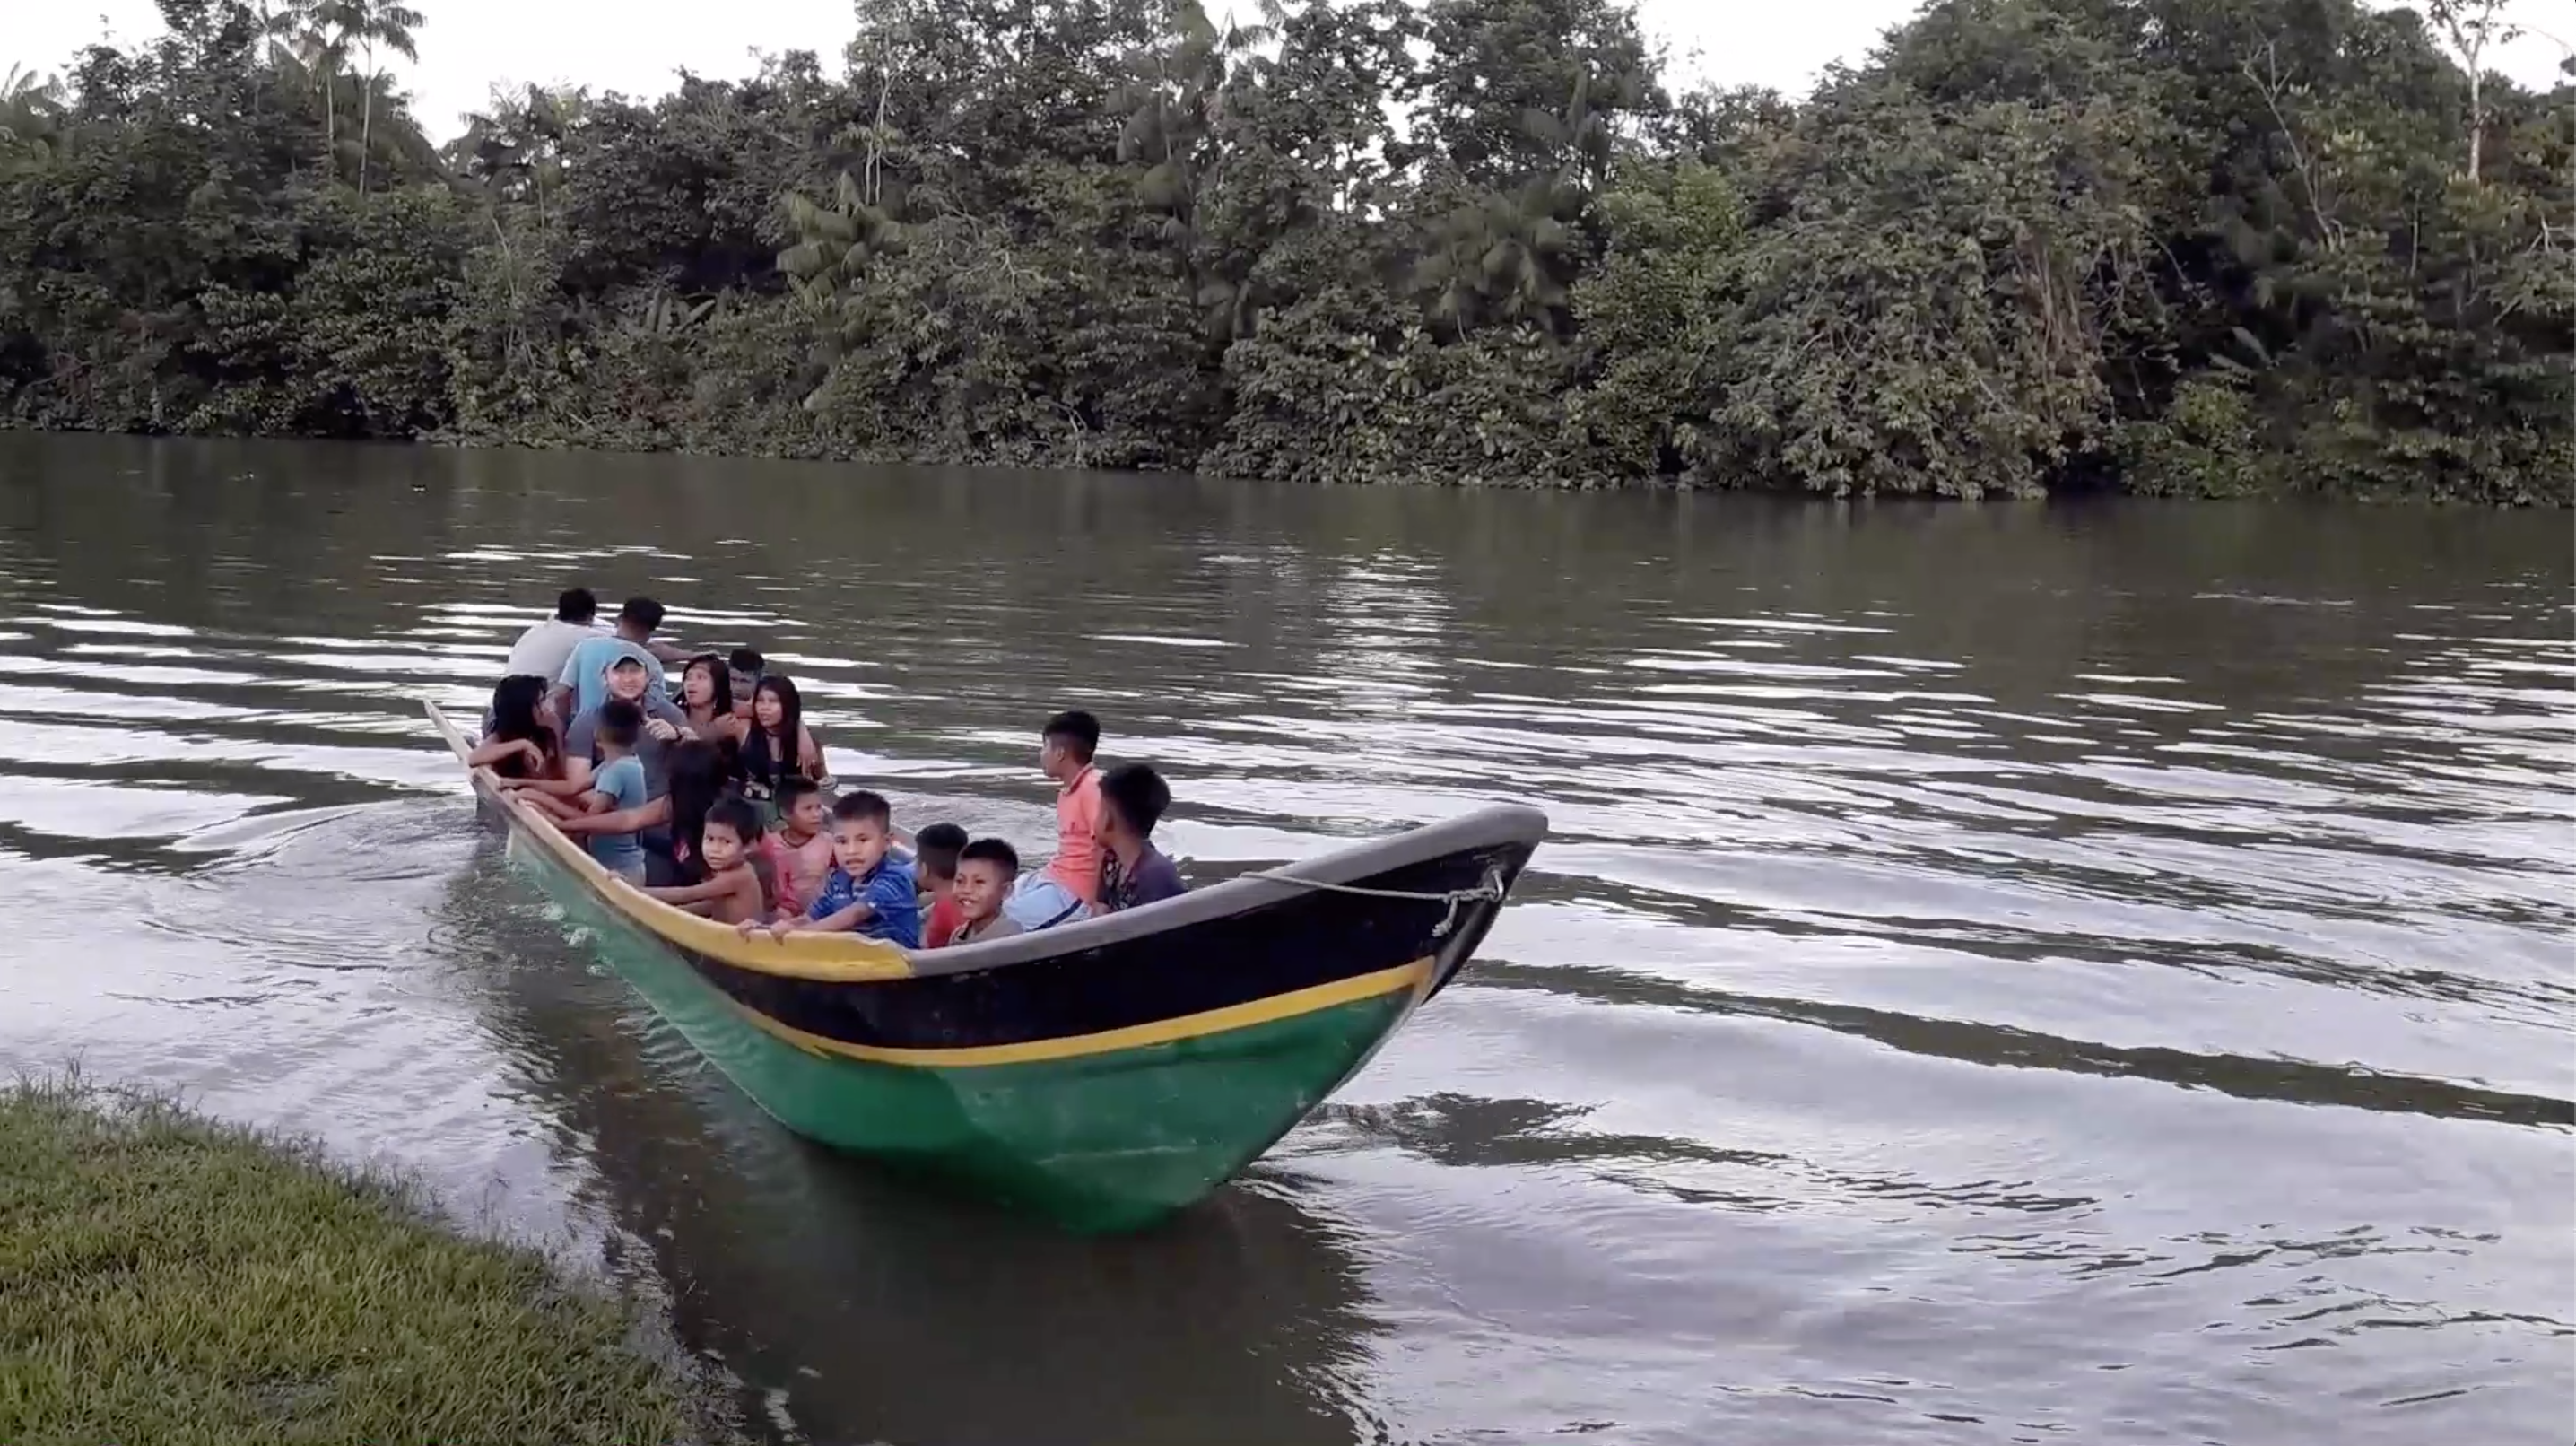 A boat for Joaquincito: With a crowdfunding campaign and the prize money from the "Fast Forward Science" competition for the video reportage, Frogs & Friends financed the purchase for the community. | Frogs & Friends